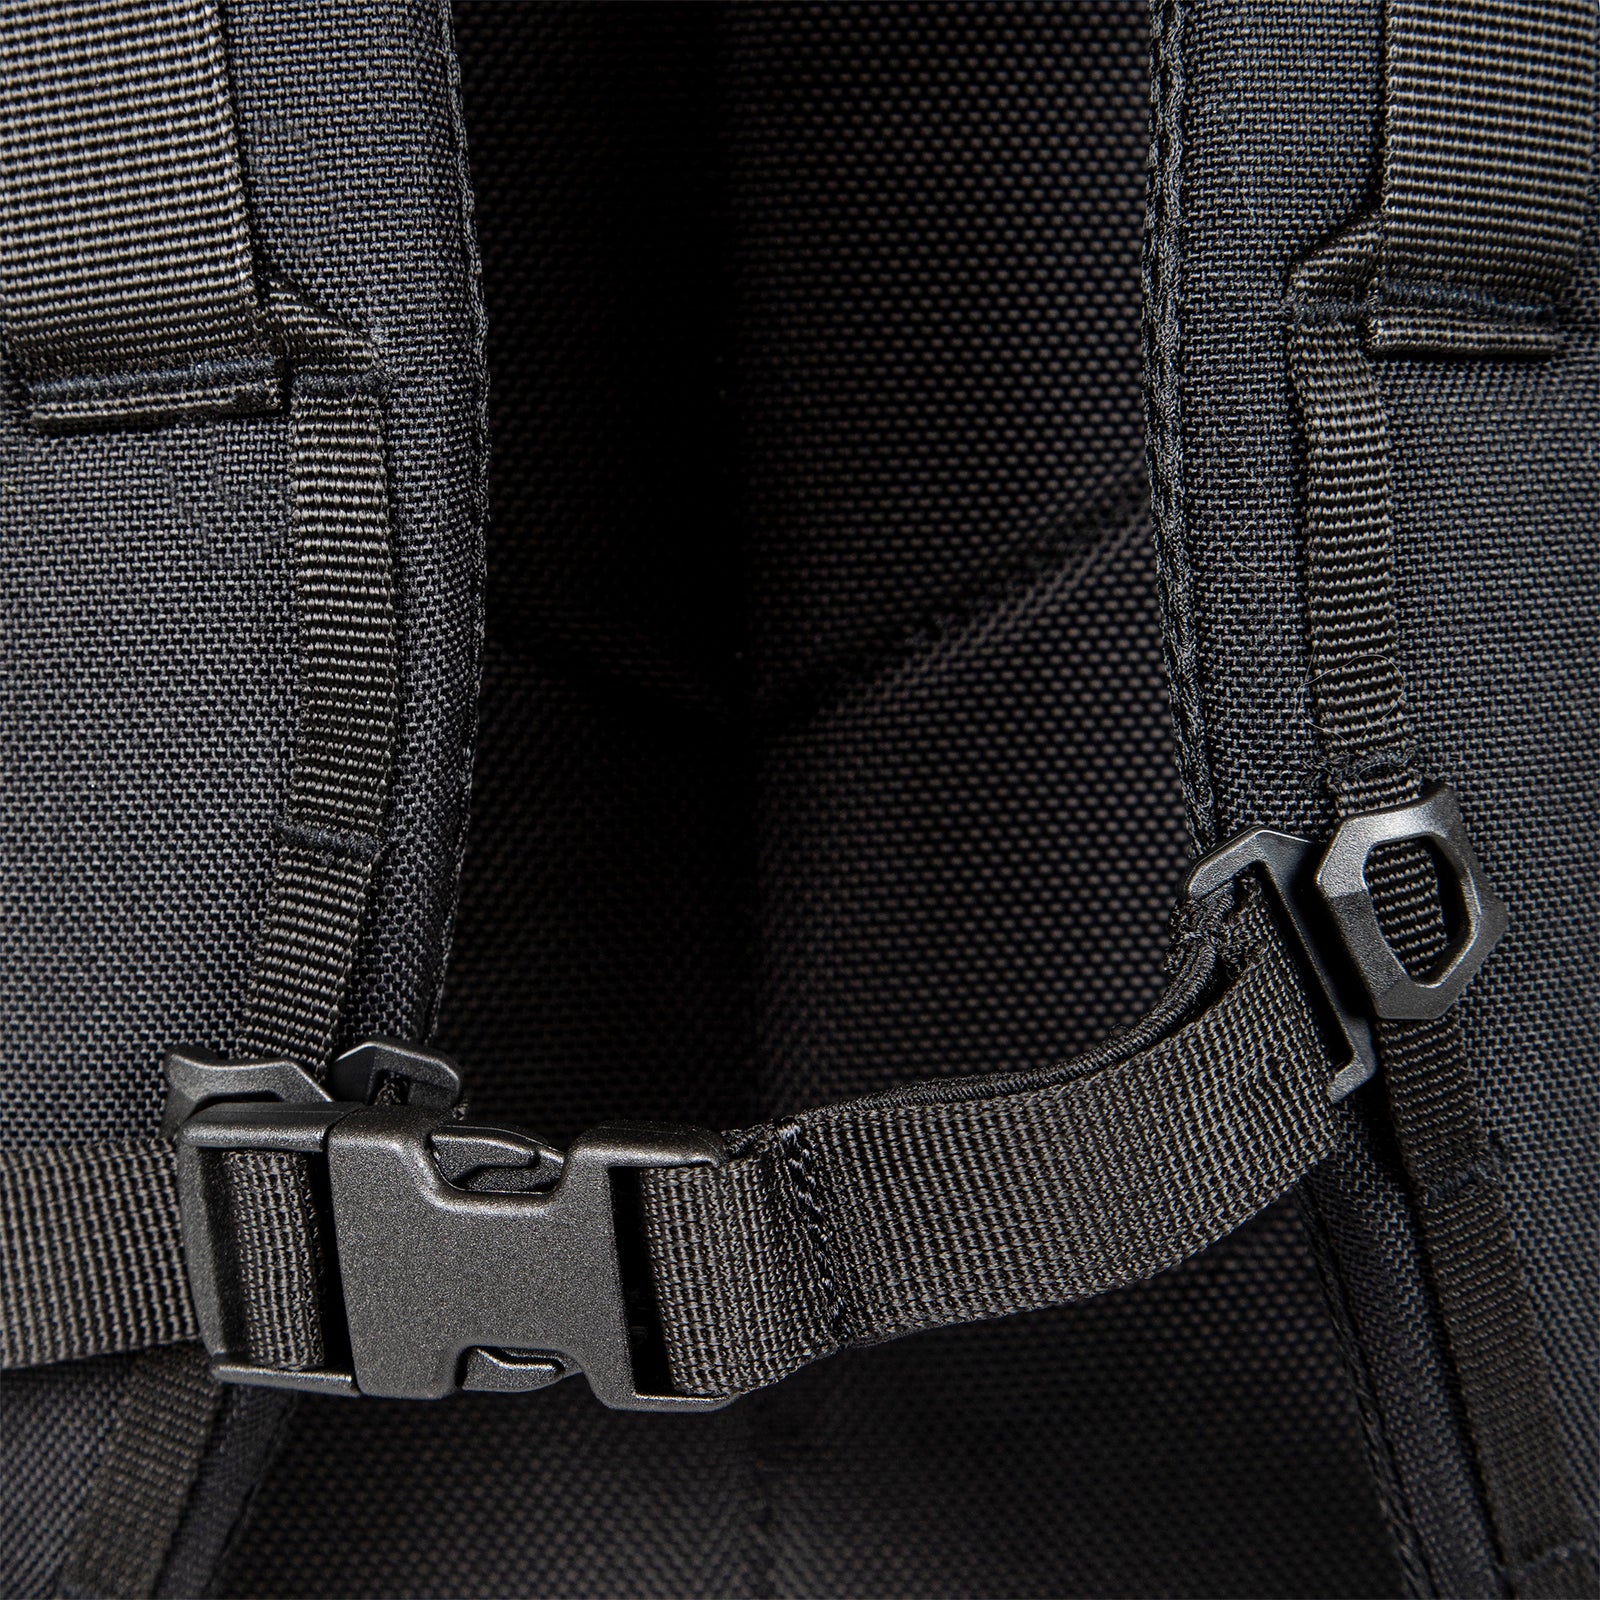 General shot of sternum strap on Topo Designs Global Travel Bag 30L Durable Carry On Convertible Laptop Travel Backpack